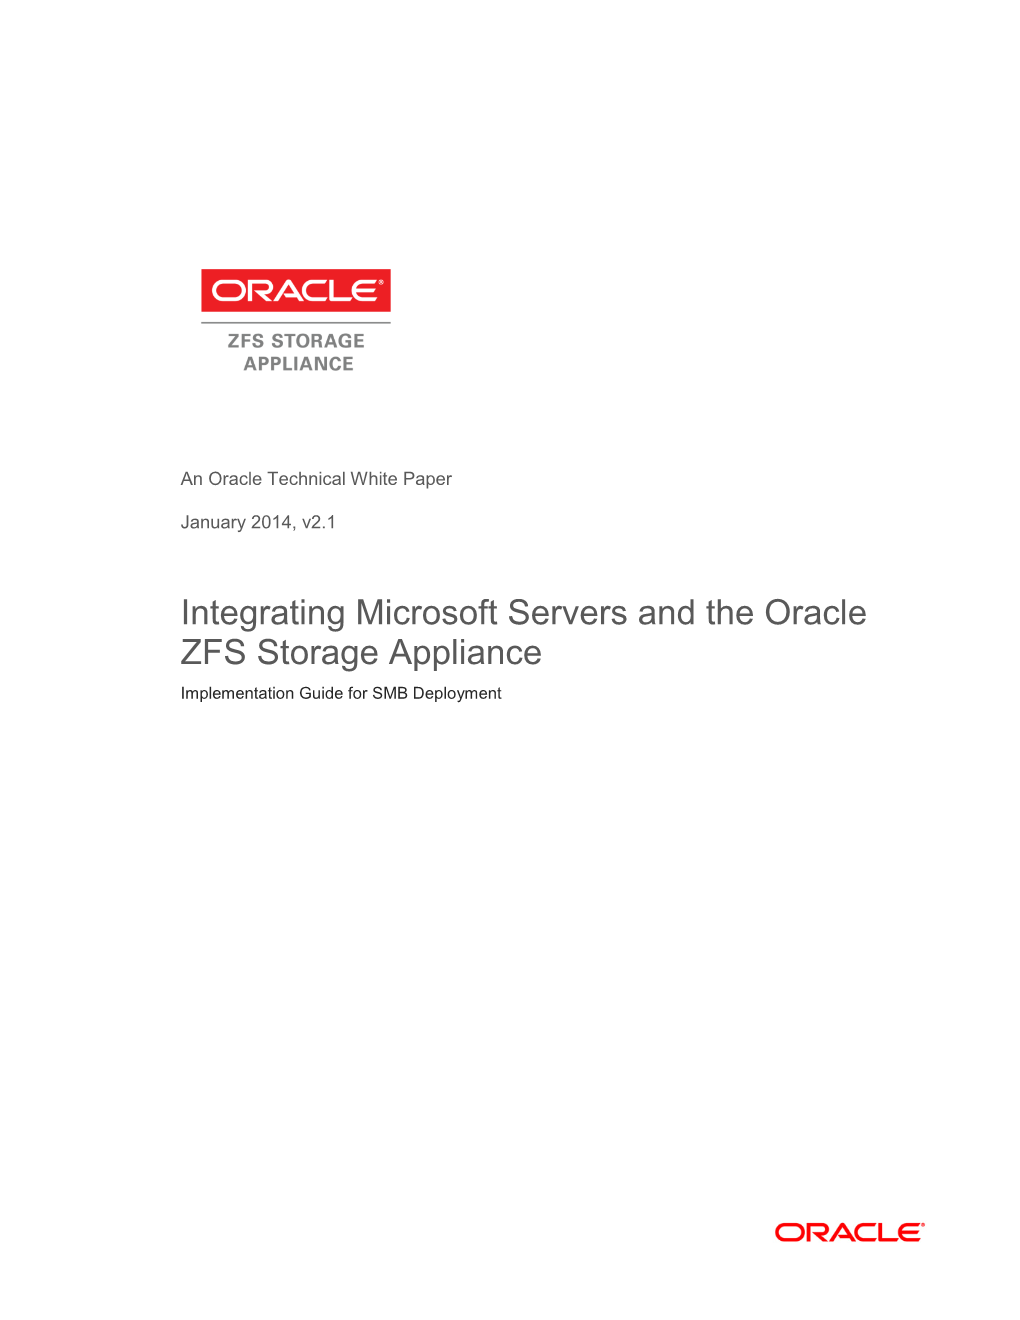 Integrating Microsoft Servers and the Oracle ZFS Storage Appliance Implementation Guide for SMB Deployment